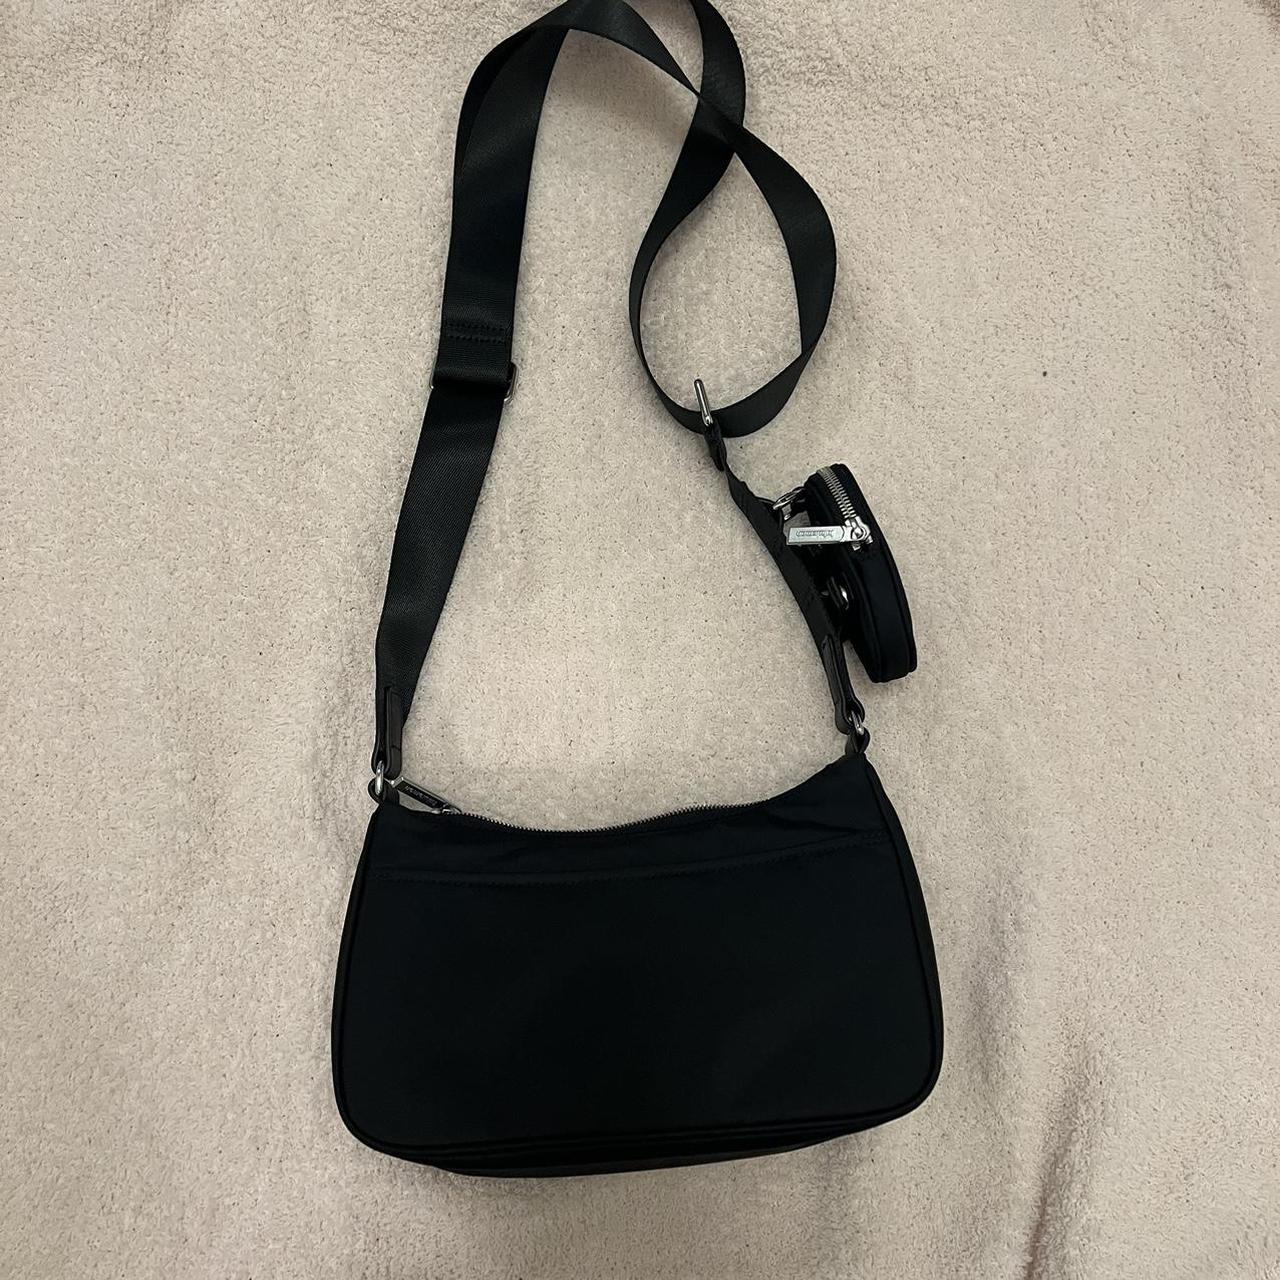 Lululemon crossbody with nano pouch New without... - Depop